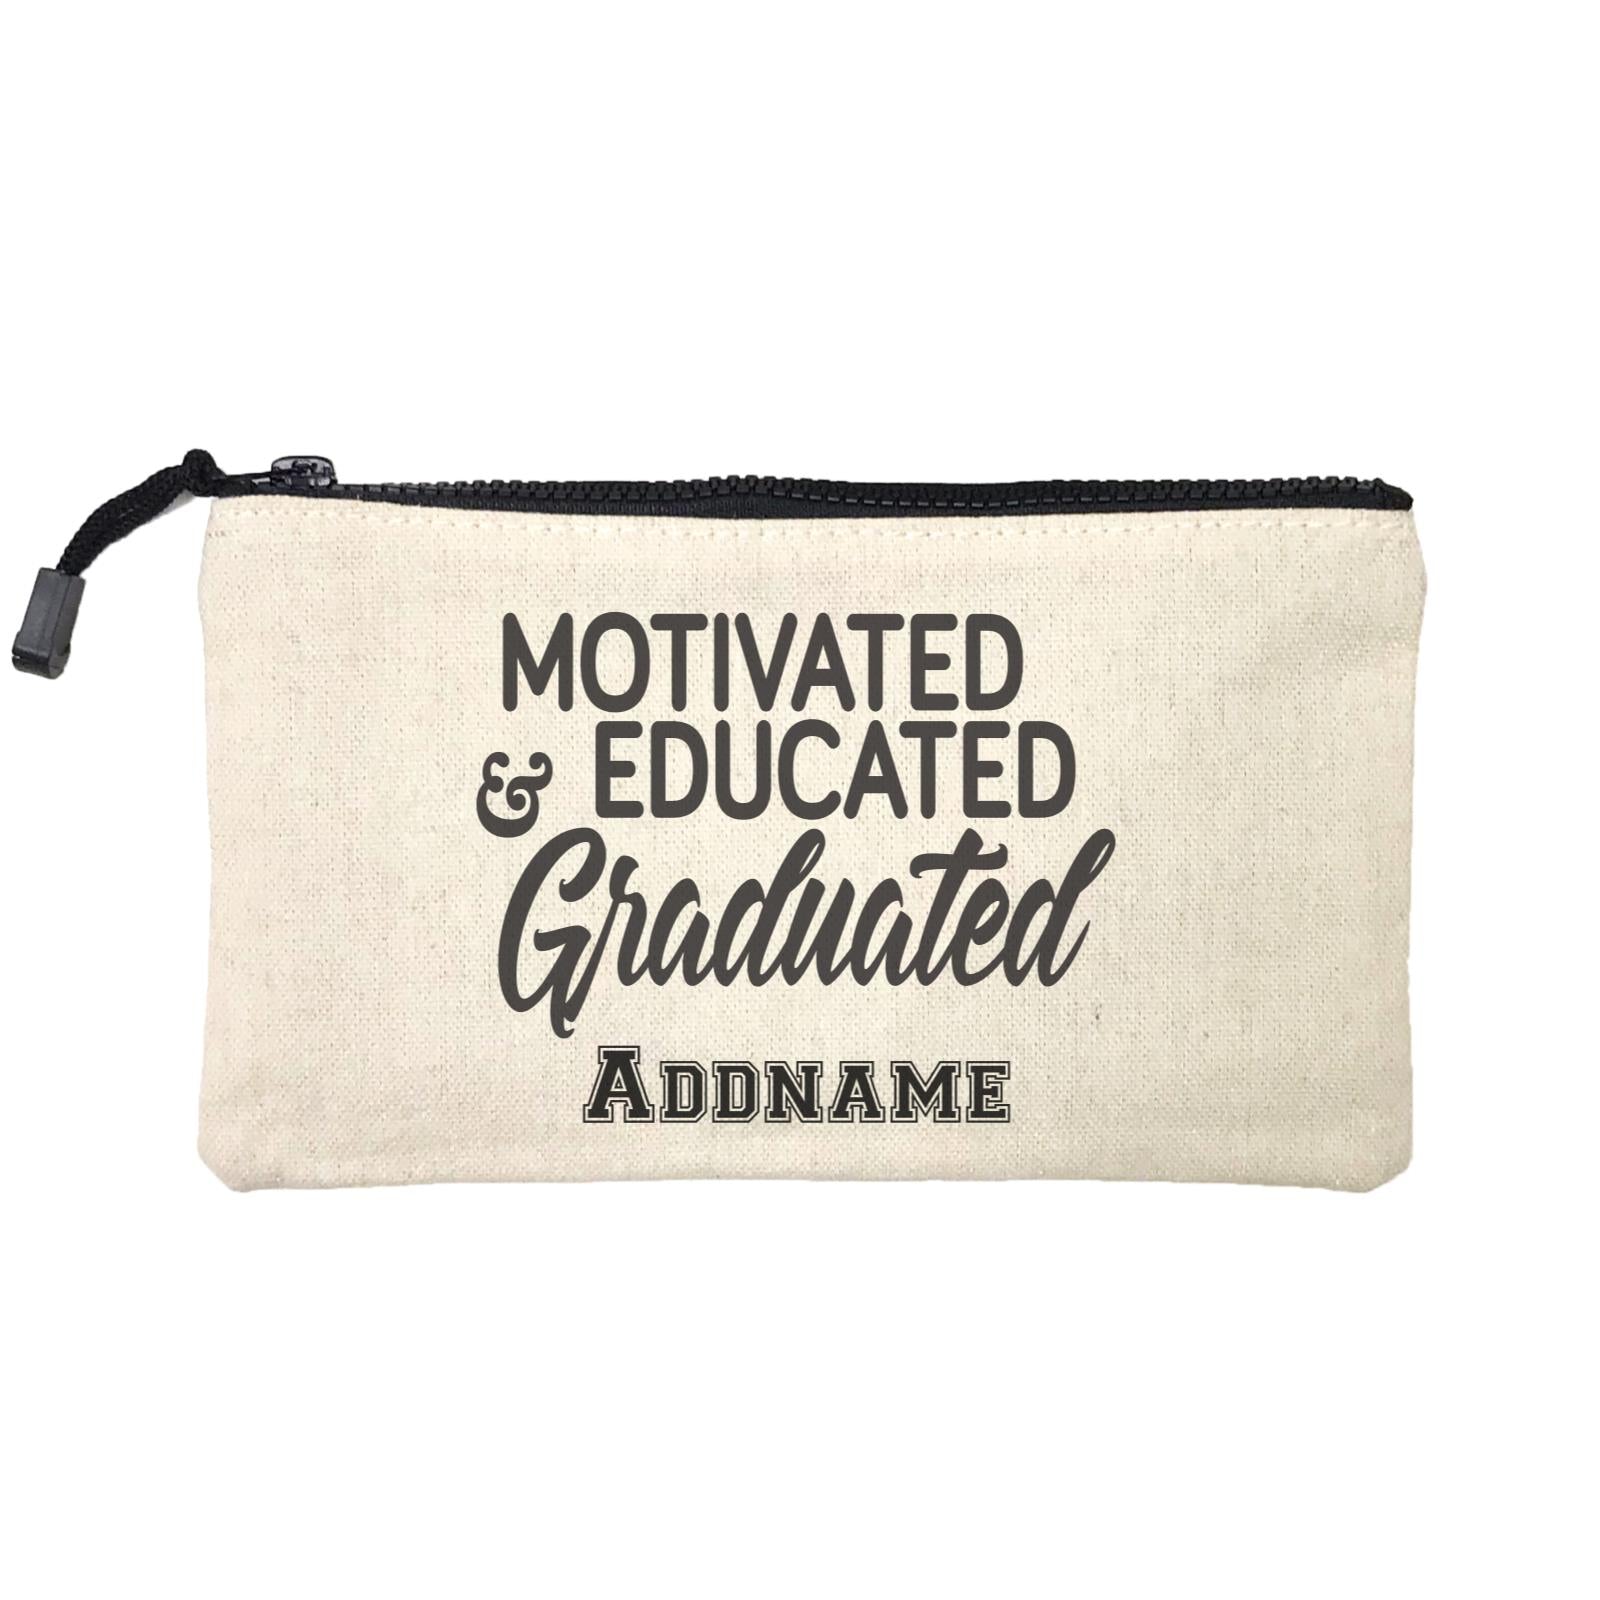 Graduation Series Motivated, Educated, Graduated Mini Accessories Stationery Pouch